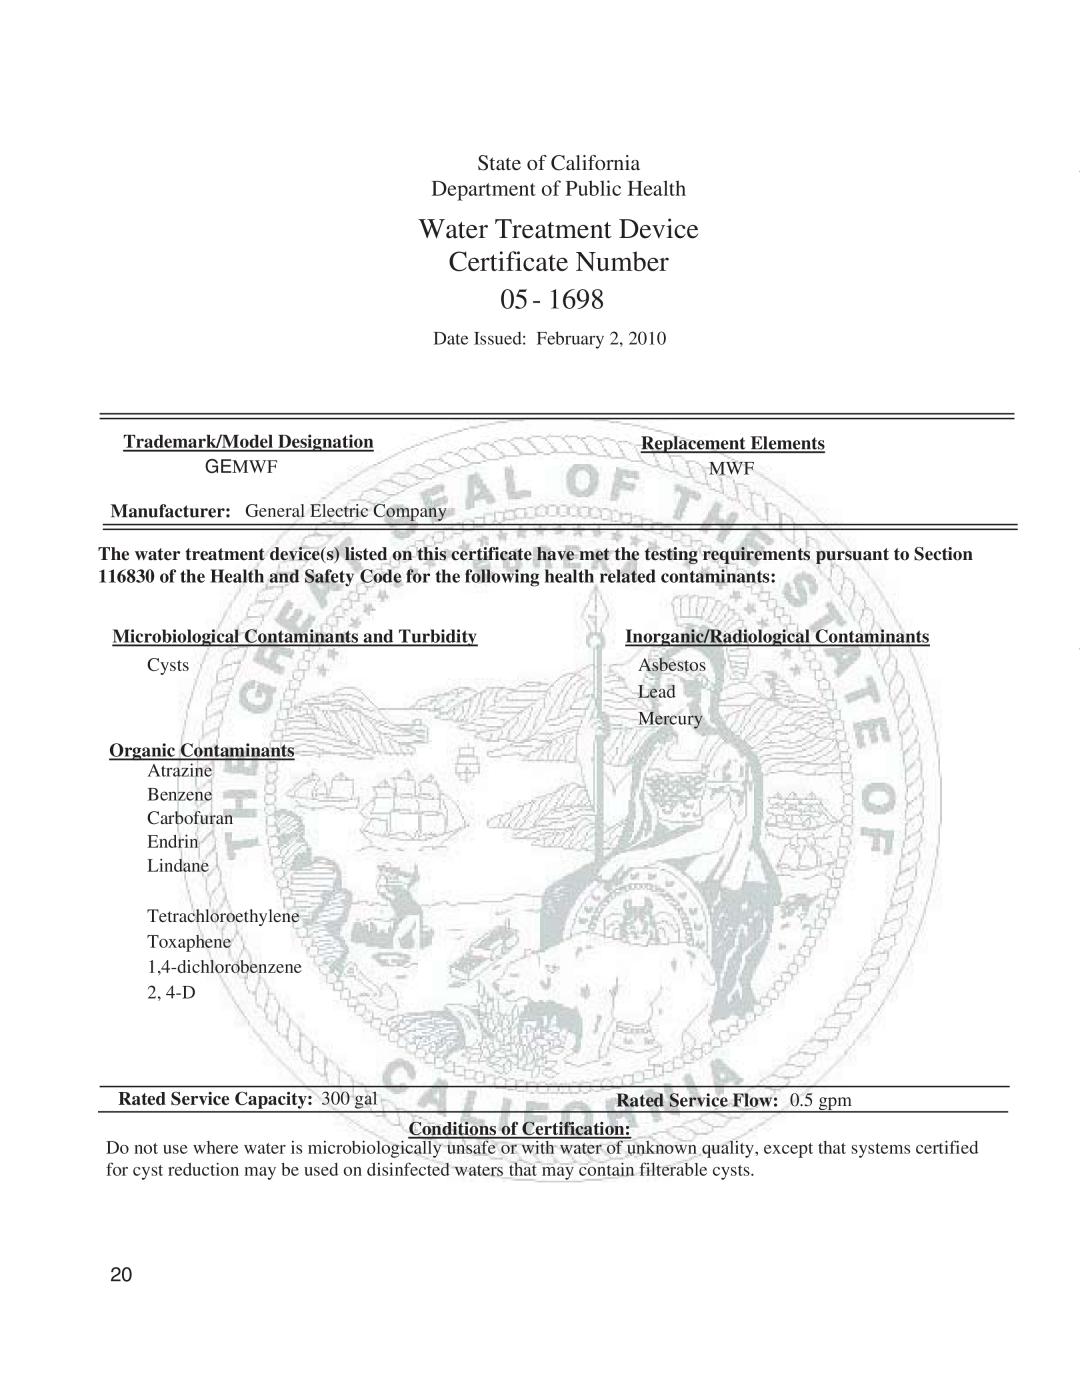 GE GARF19XXYK, ED5KVEXVQ manual Water Treatment Device Certificate Number, State of California Department of Public Health 